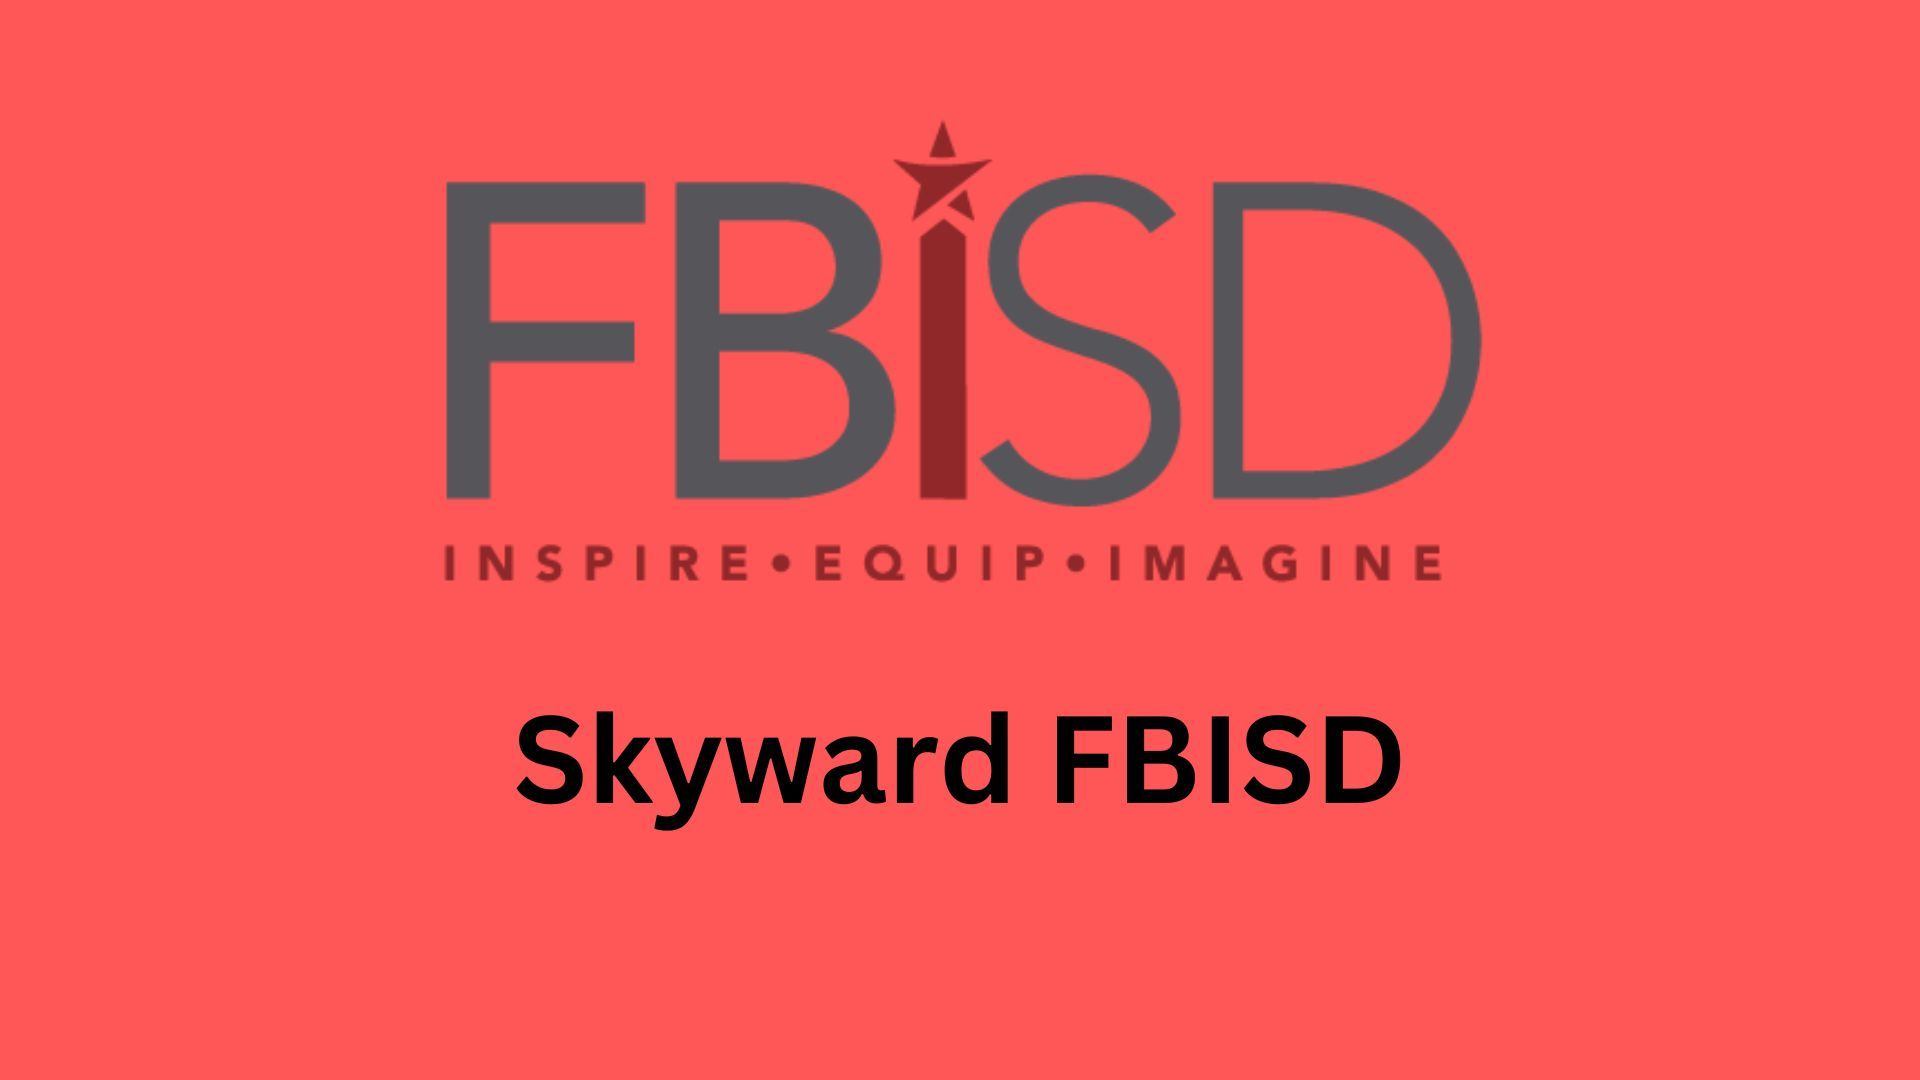 The FBISD Skyward's functionality for academic information